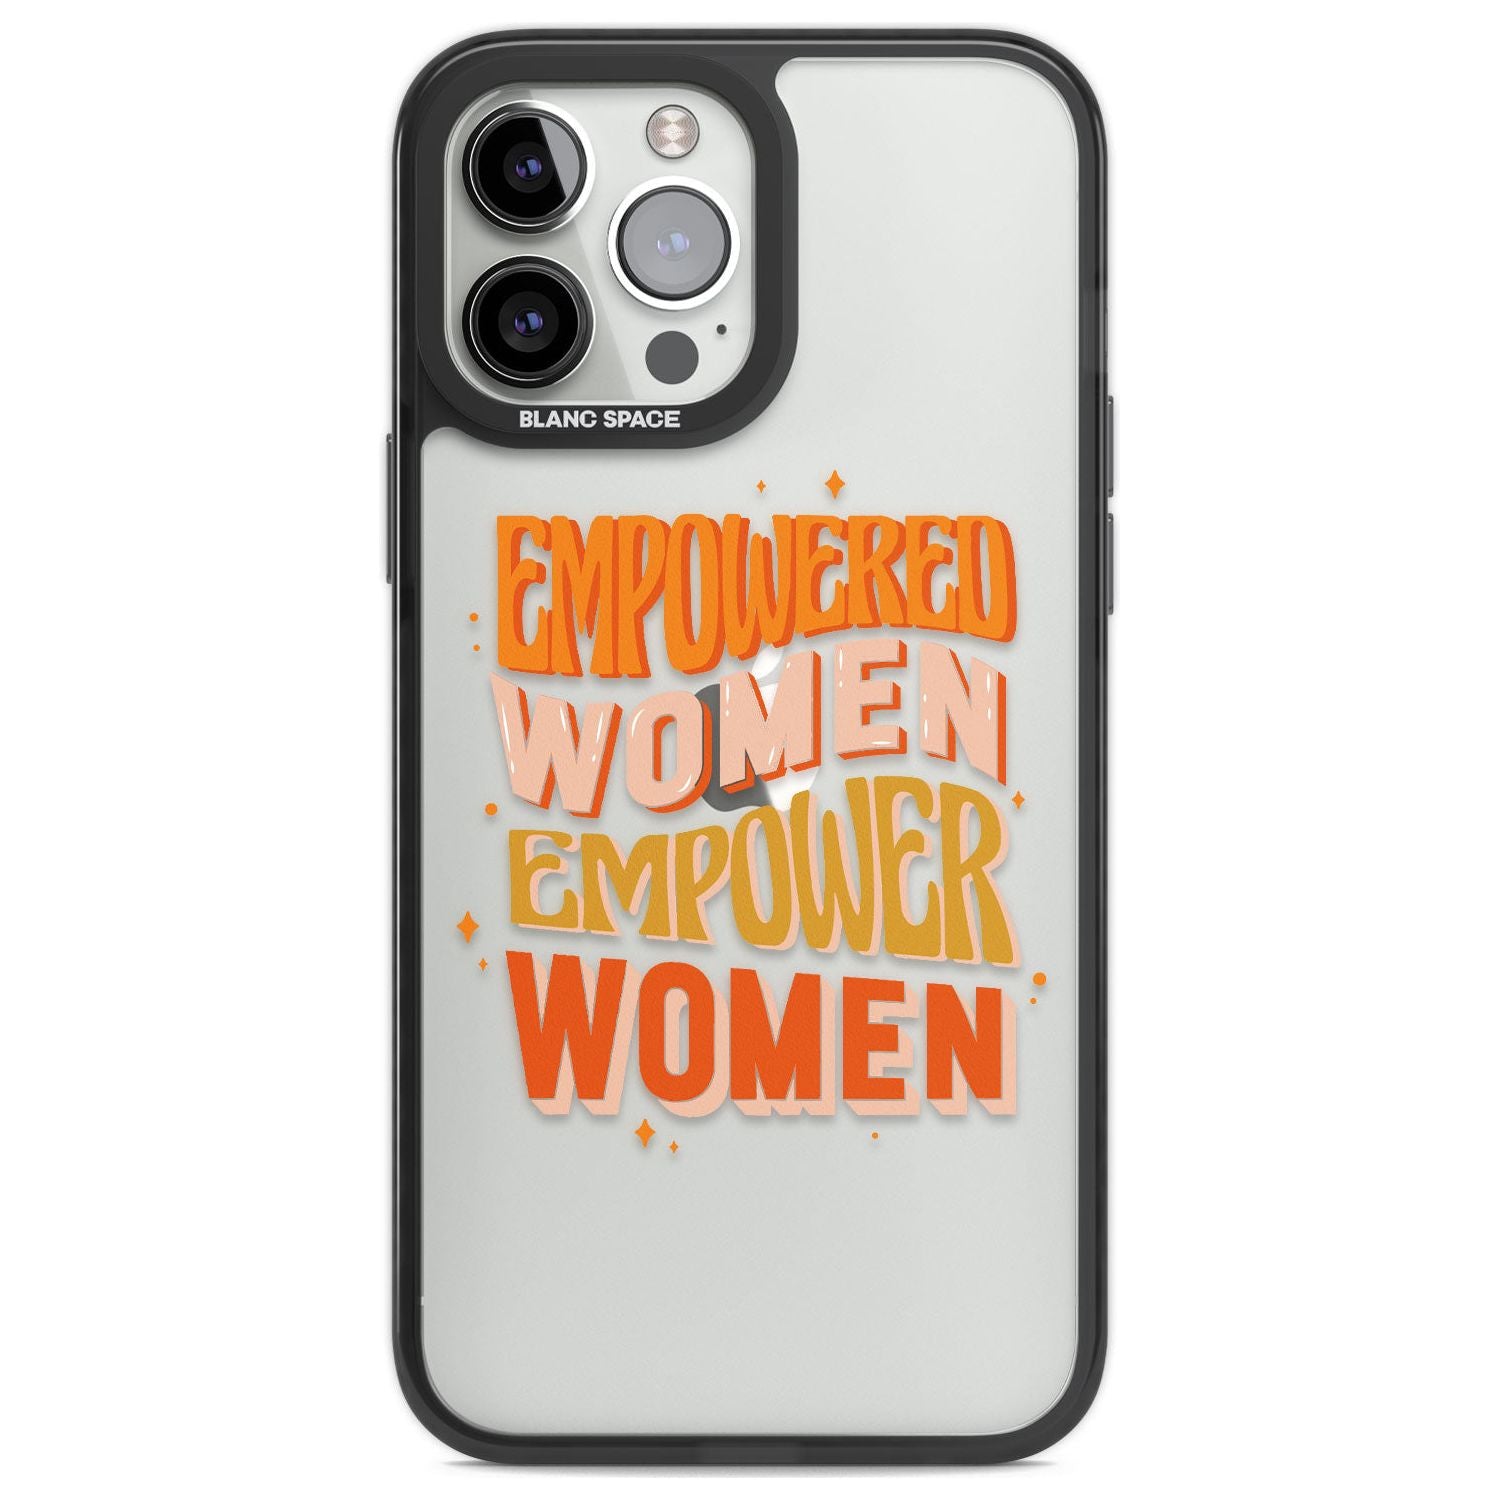 Empowered Women Phone Case iPhone 13 Pro Max / Black Impact Case,iPhone 14 Pro Max / Black Impact Case Blanc Space